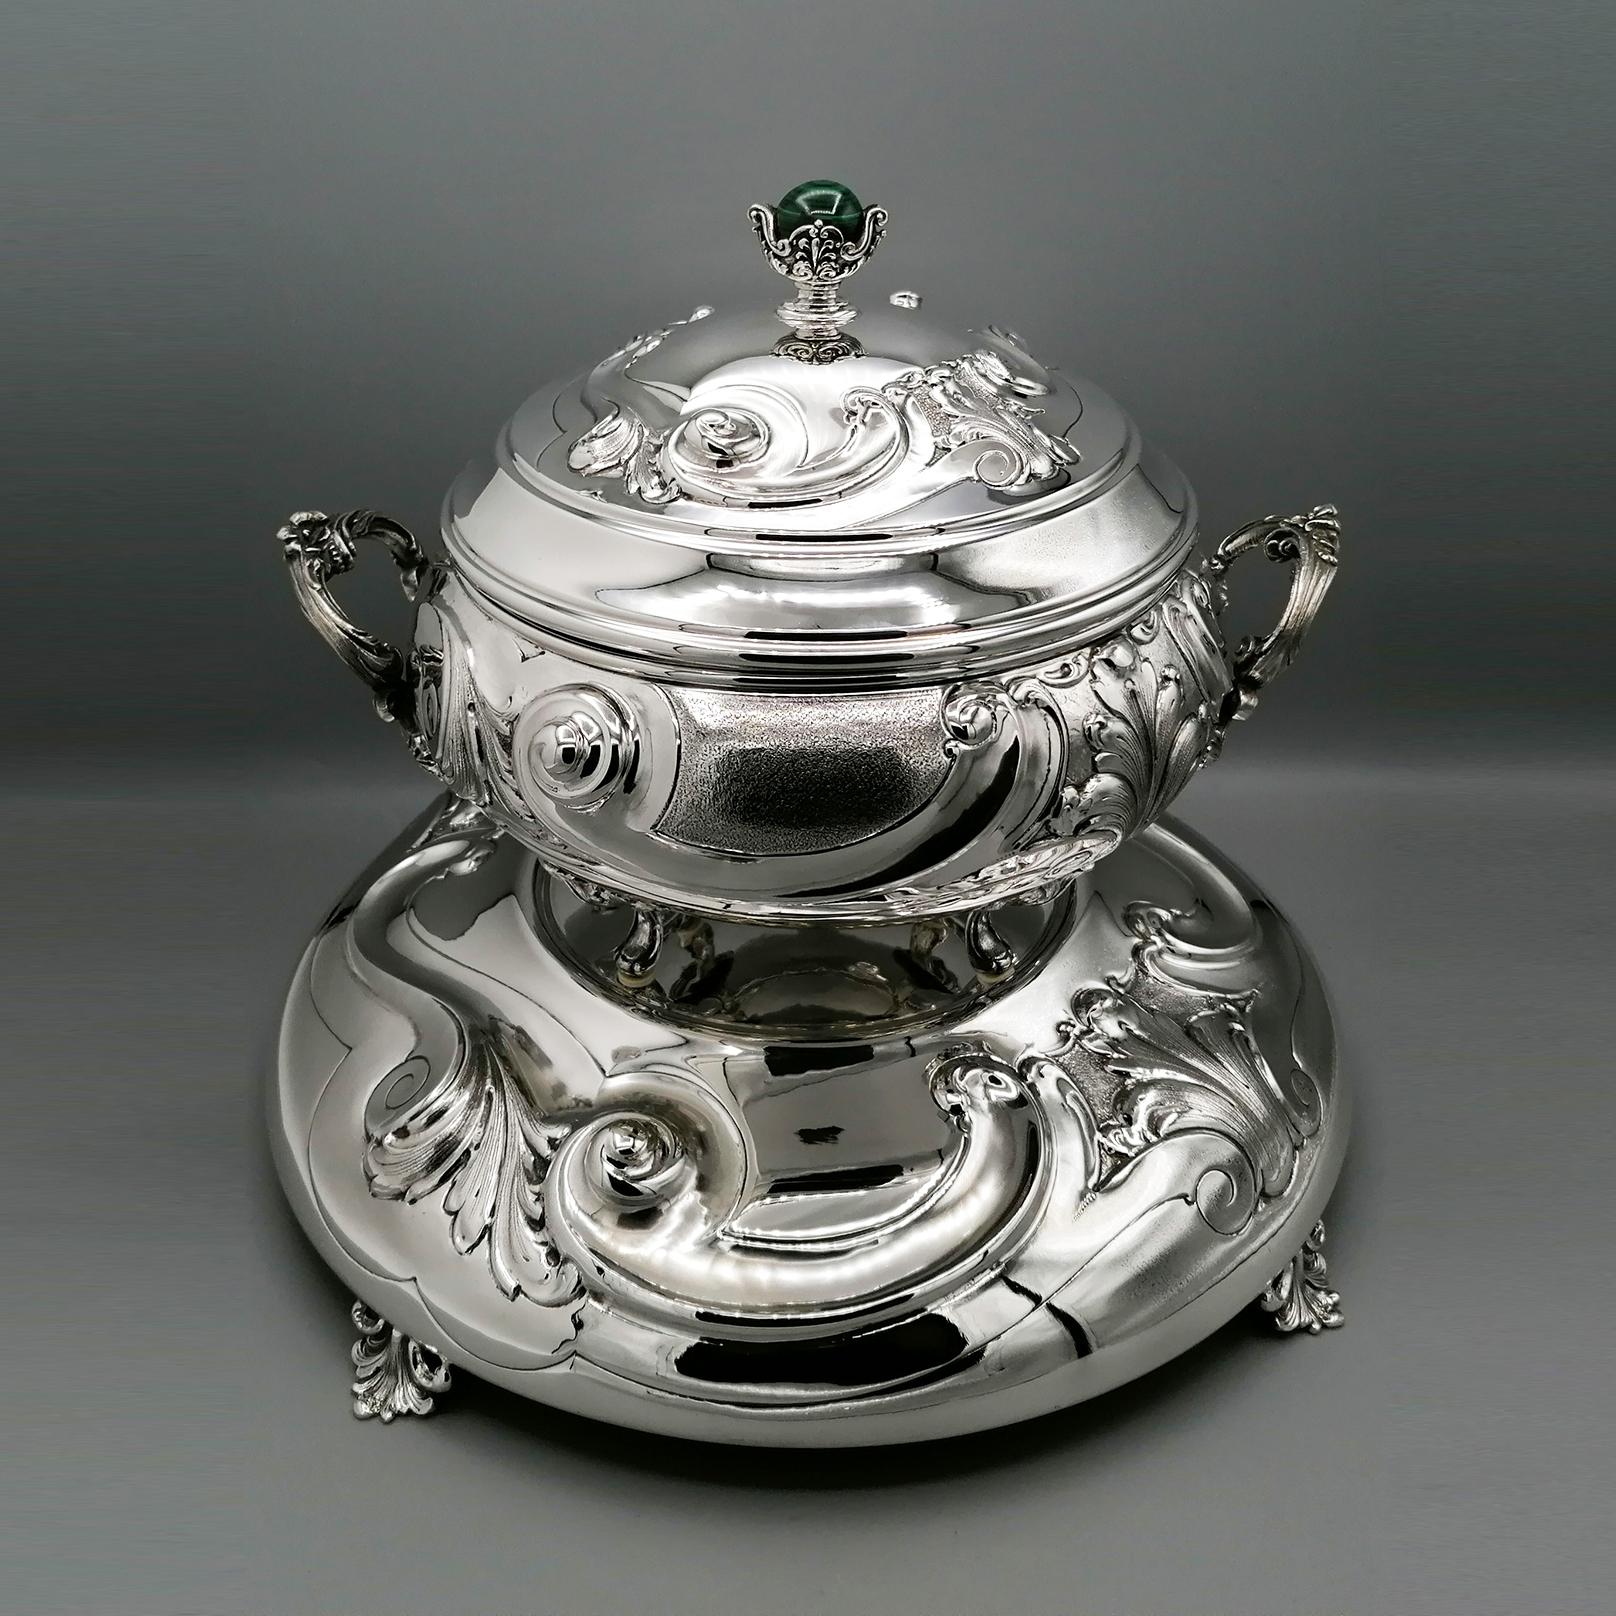 Baroque 20th Century Italian Solid Silver Italia Soup Tureen on Stand For Sale